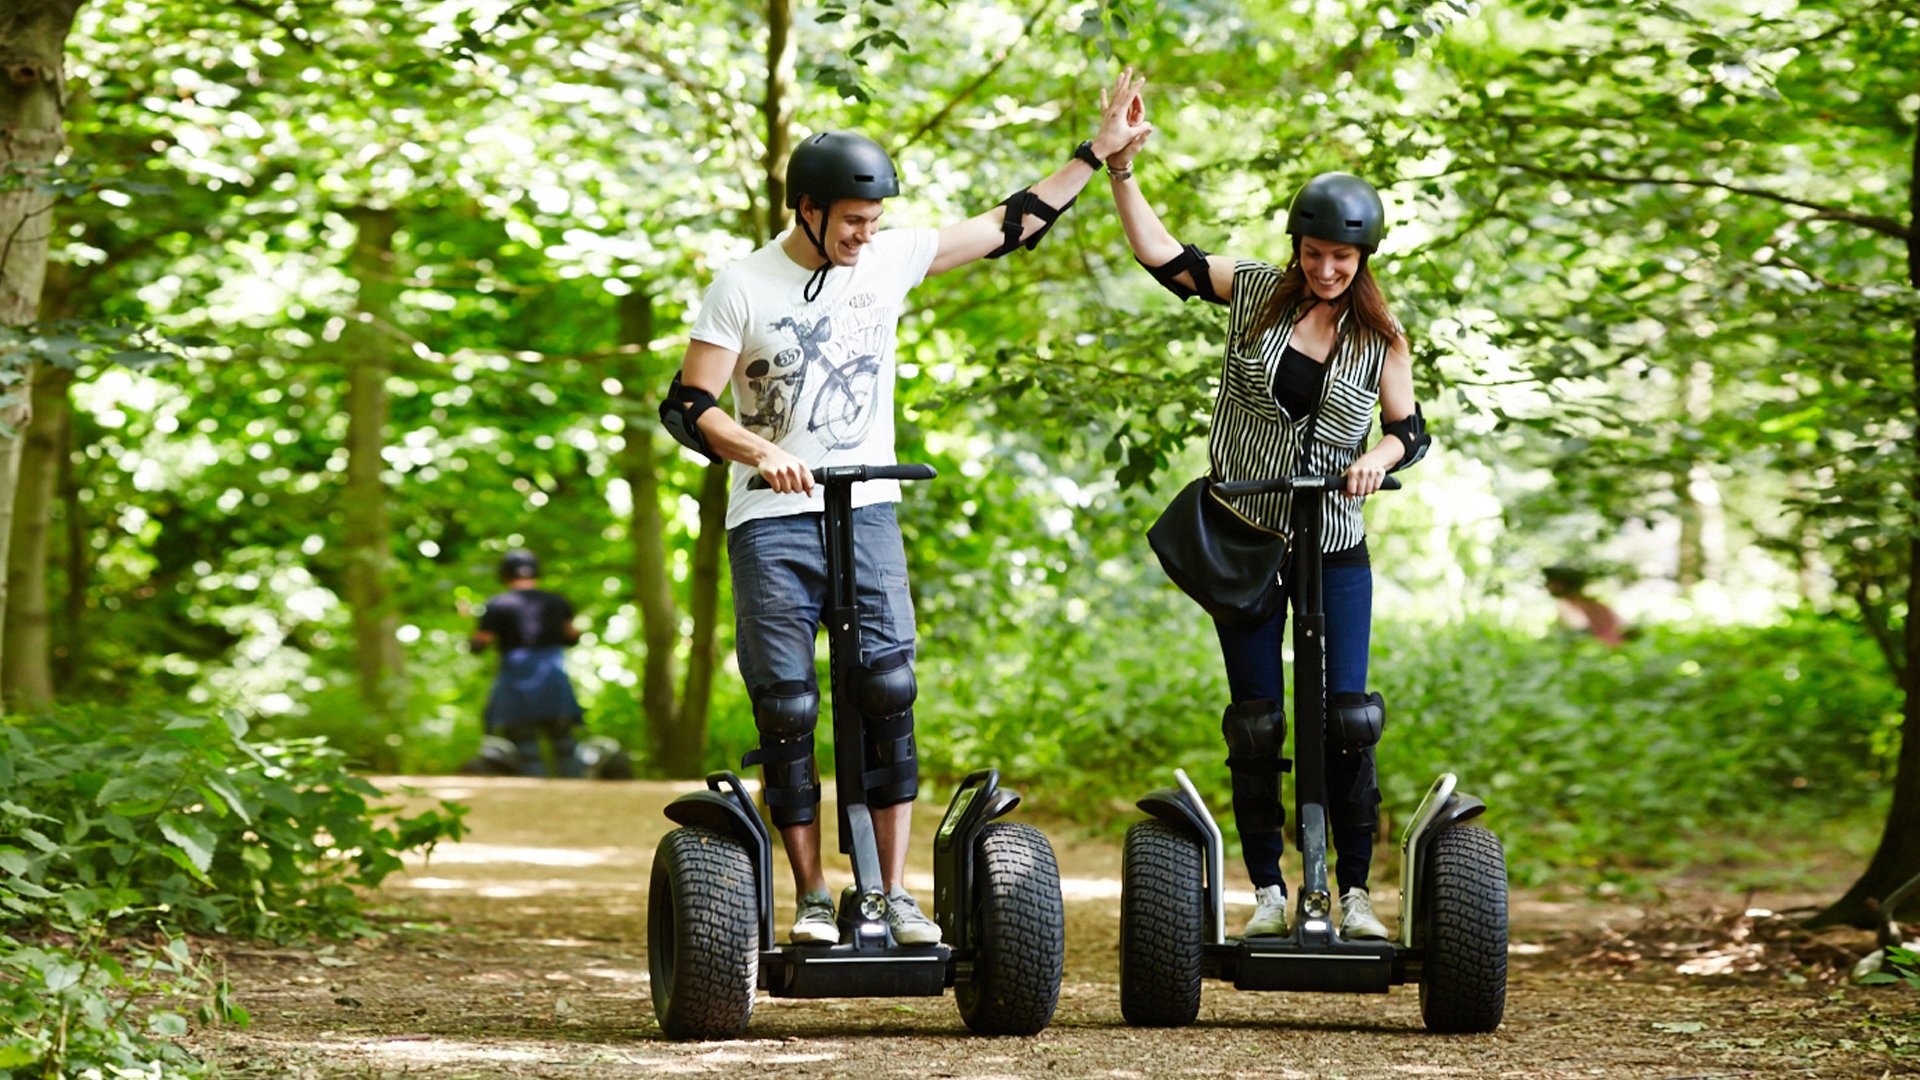 Image name Segway Events Wetherby Stockeld Park the 2 image from the post Stockeld Park in Yorkshire.com.